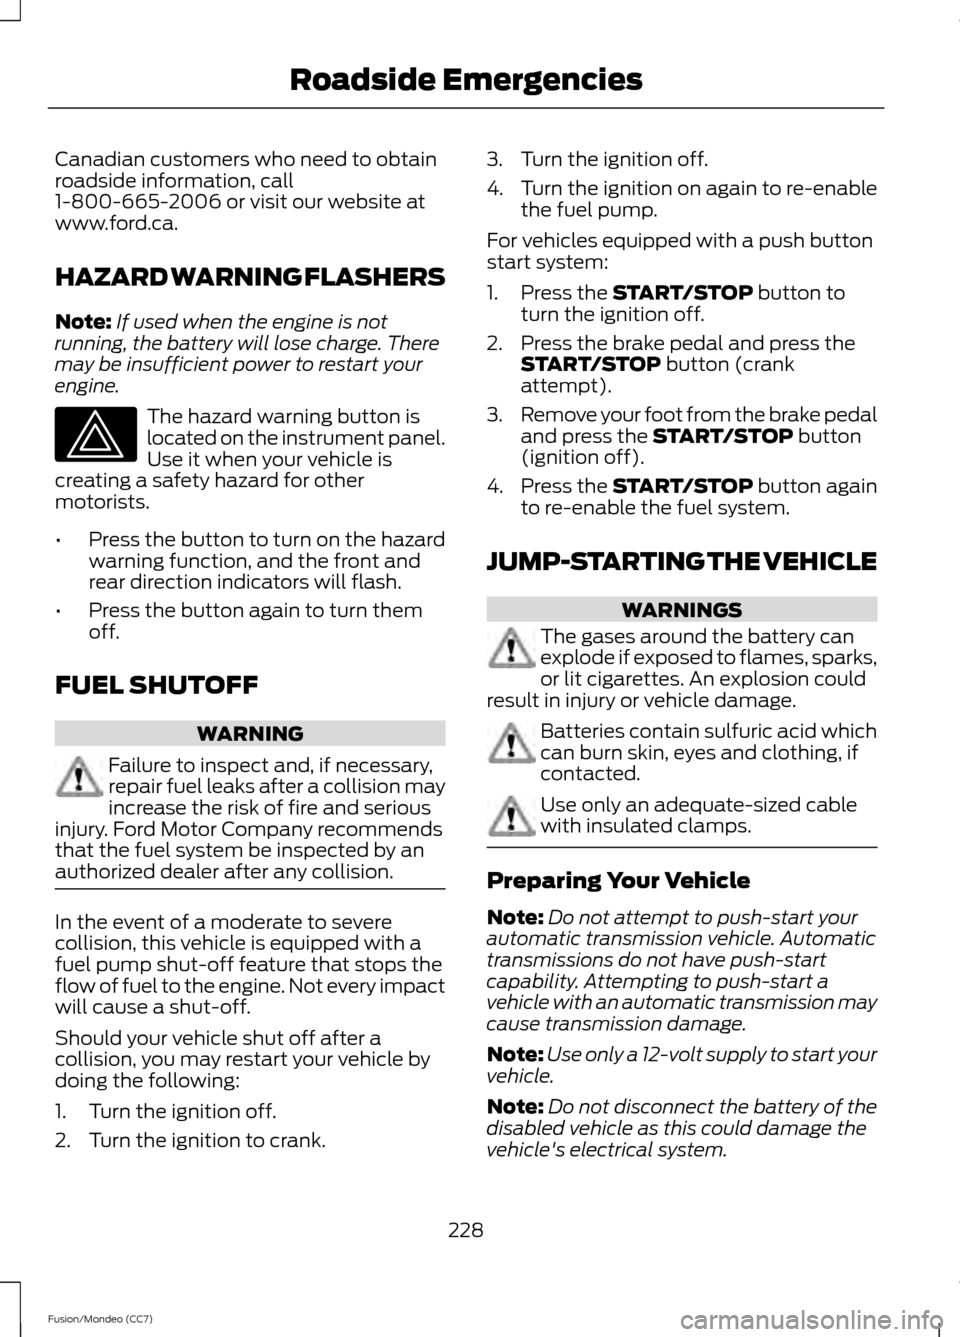 FORD FUSION (AMERICAS) 2013 2.G Owners Manual Canadian customers who need to obtain
roadside information, call
1-800-665-2006 or visit our website at
www.ford.ca.
HAZARD WARNING FLASHERS
Note:
If used when the engine is not
running, the battery w